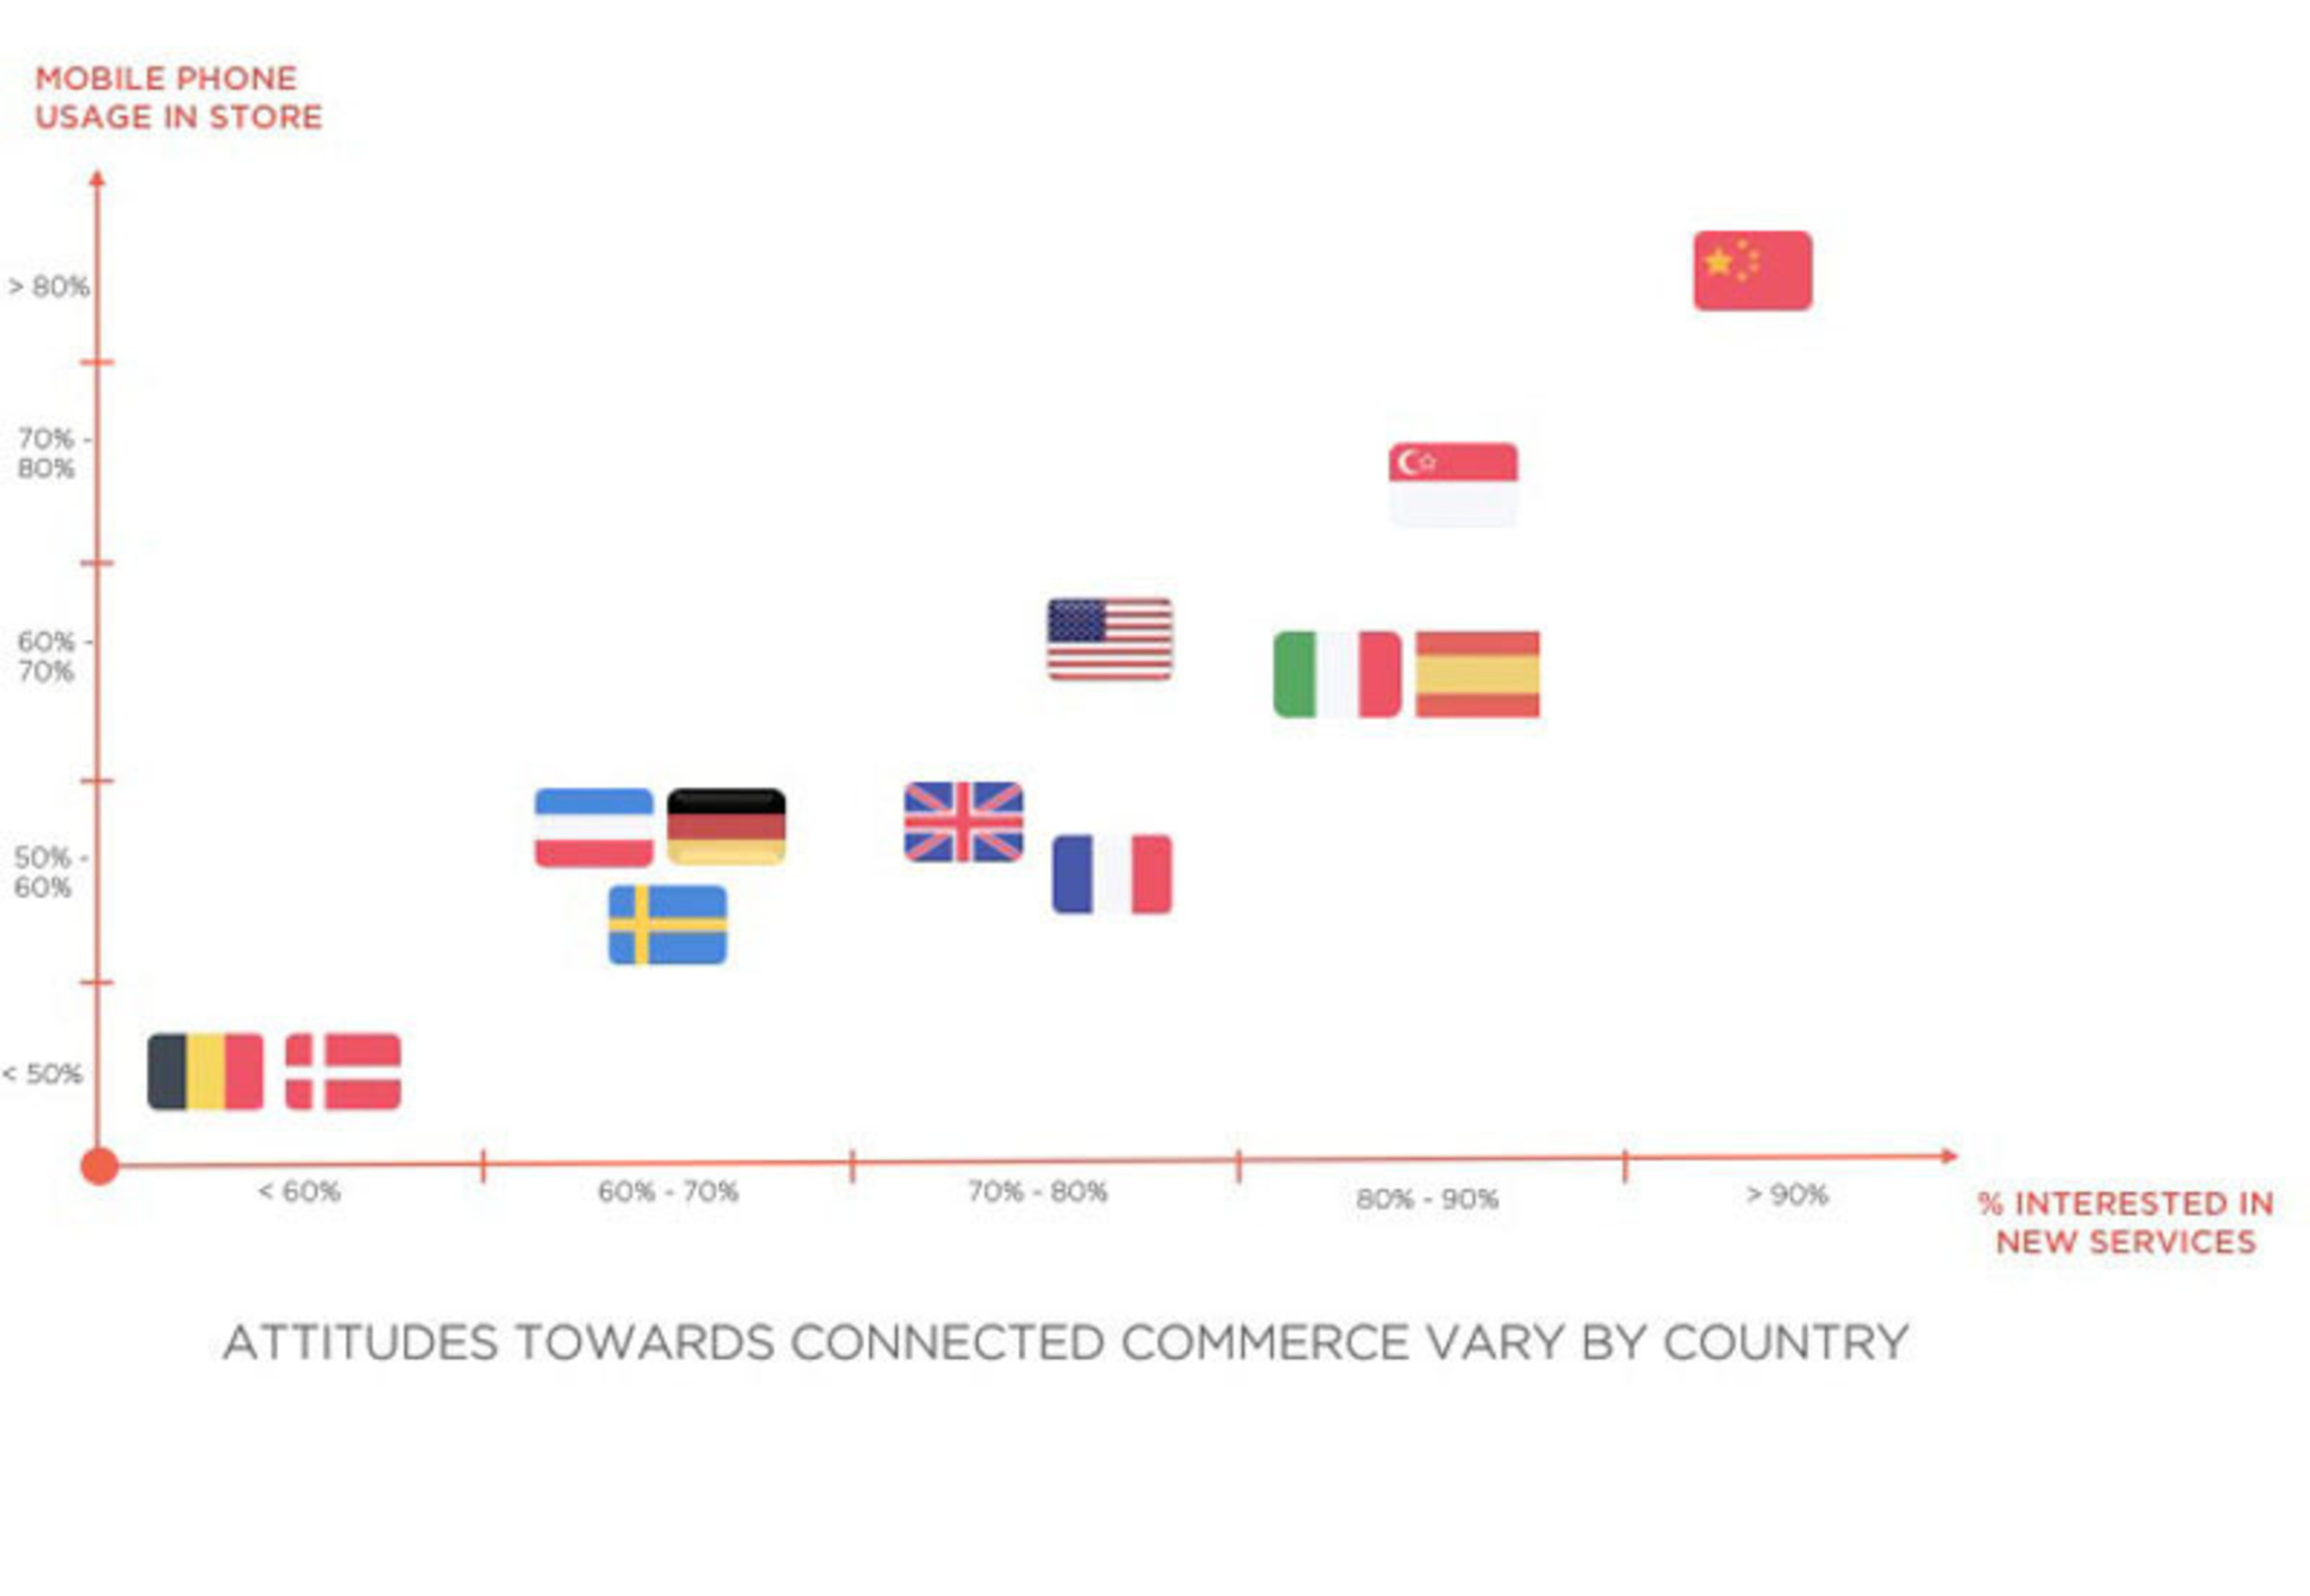 Attitudes Towards Connected Commerce Vary by Country. (PRNewsFoto/DigitasLBi) (PRNewsFoto/DIGITASLBI)